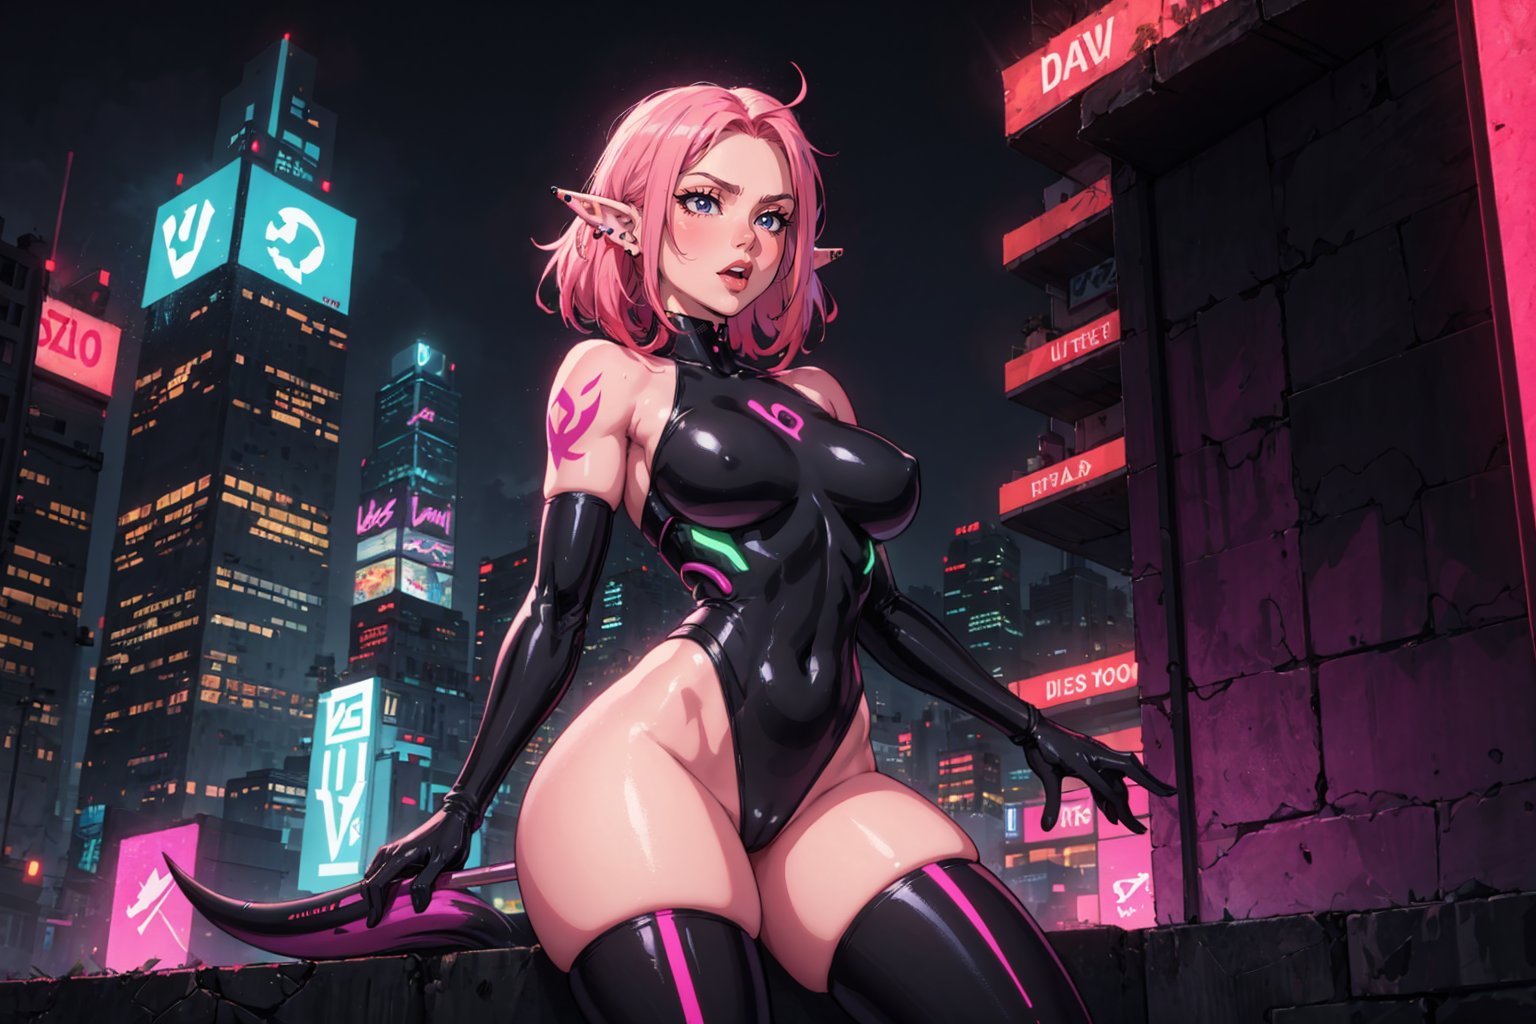 A majestic modern goth girl standing amidst the neon-lit skyscrapers of a cyberpunk city at dusk. Her piercing gaze, accentuated by dark eye circles and red-rimmed eyes, seems to pierce through the shadows. A tongue stud glints in the dim light as she gazes out upon the cityscape. Her striking features are framed by her vibrant purple twin tail hair, adorned with elf-like ear details. Tattoos on her arms seem to pulse with an otherworldly energy, as if fueled by the synthwave beats that fill the air. The camera captures her in a wide shot, showcasing her eclectic style against the backdrop of a dystopian metropolis bathed in a warm, orange-tinged night light.